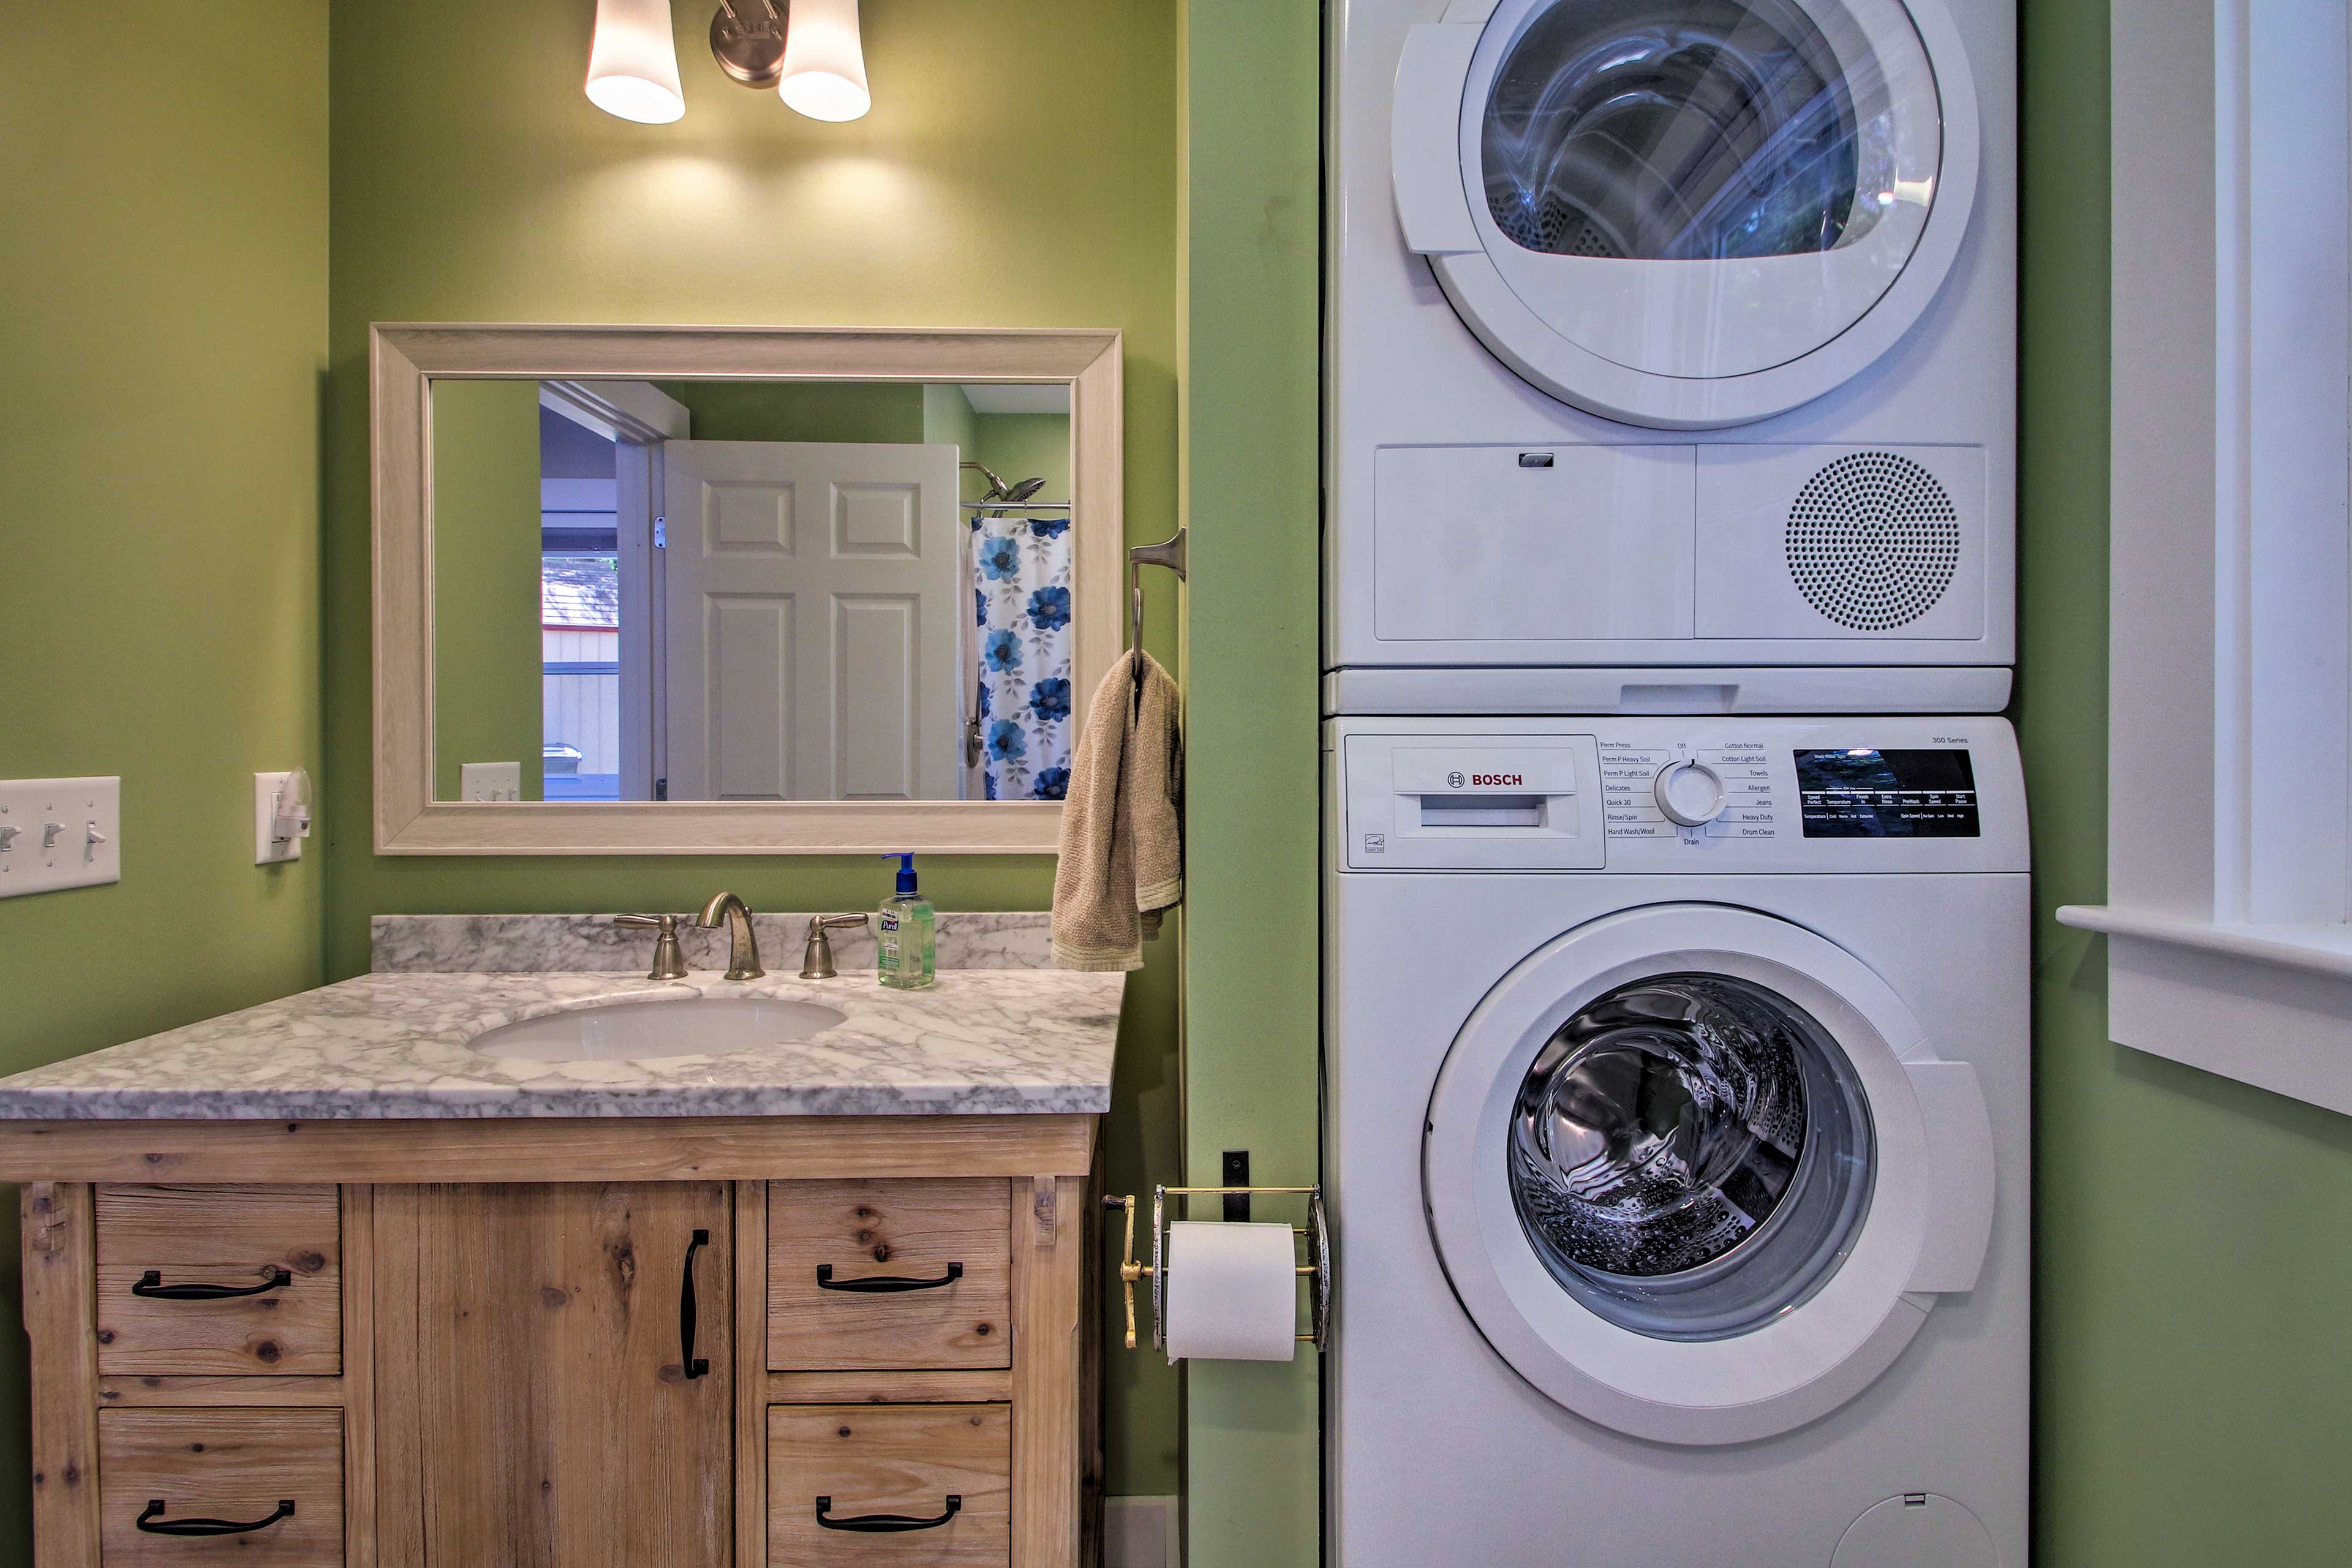 Keep your wardrobe fresh with the on-site washer & dryer.